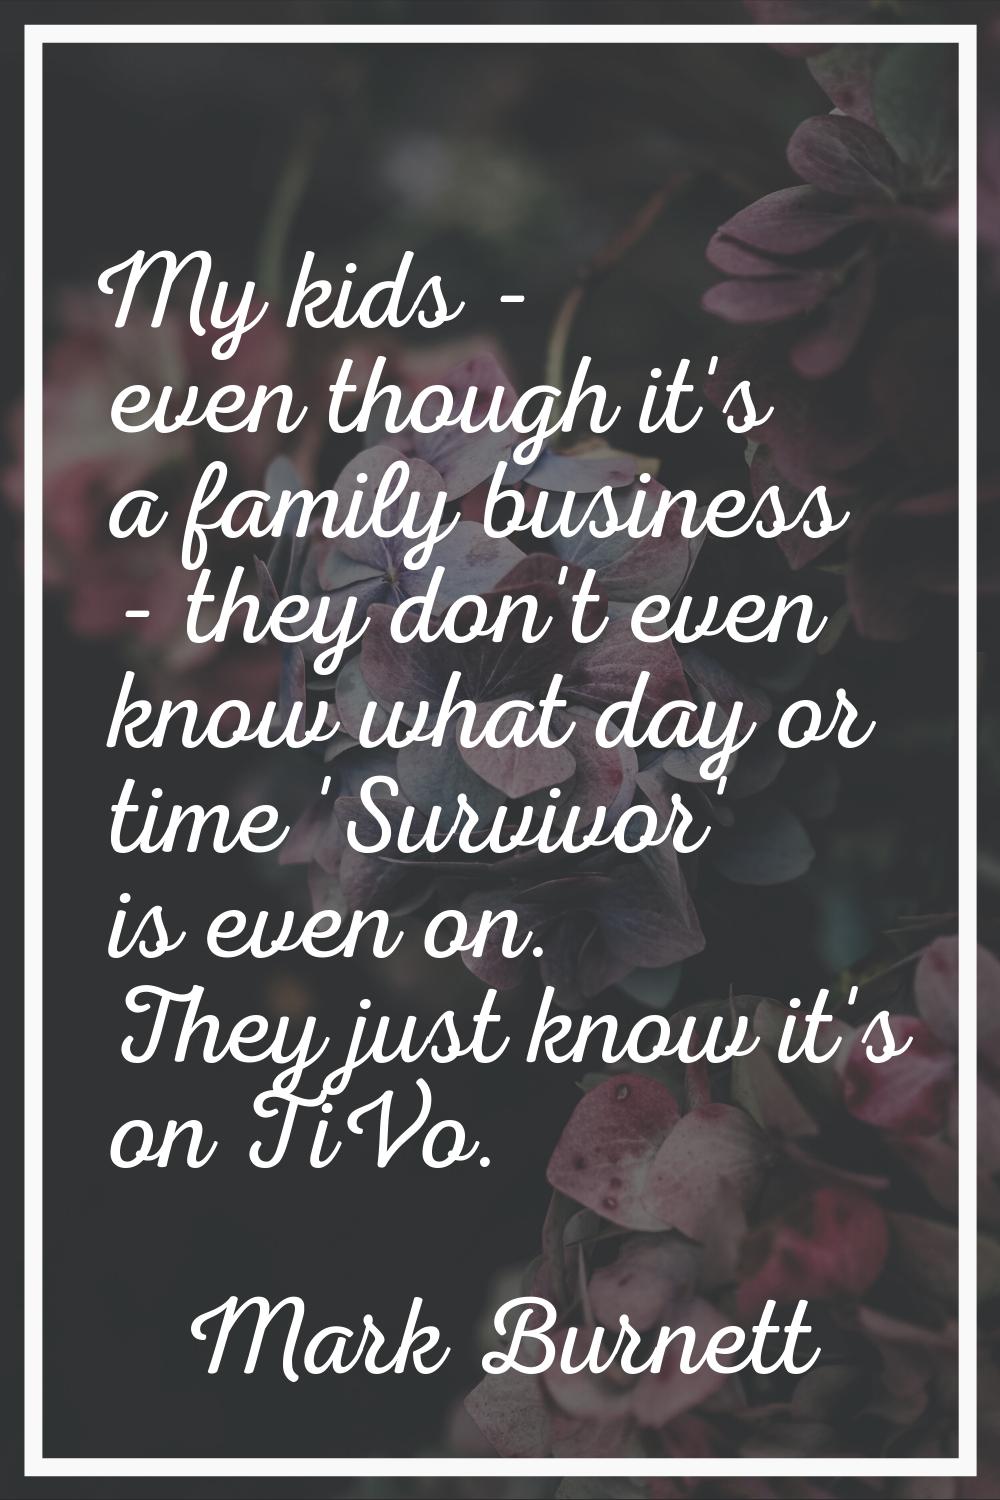 My kids - even though it's a family business - they don't even know what day or time 'Survivor' is 